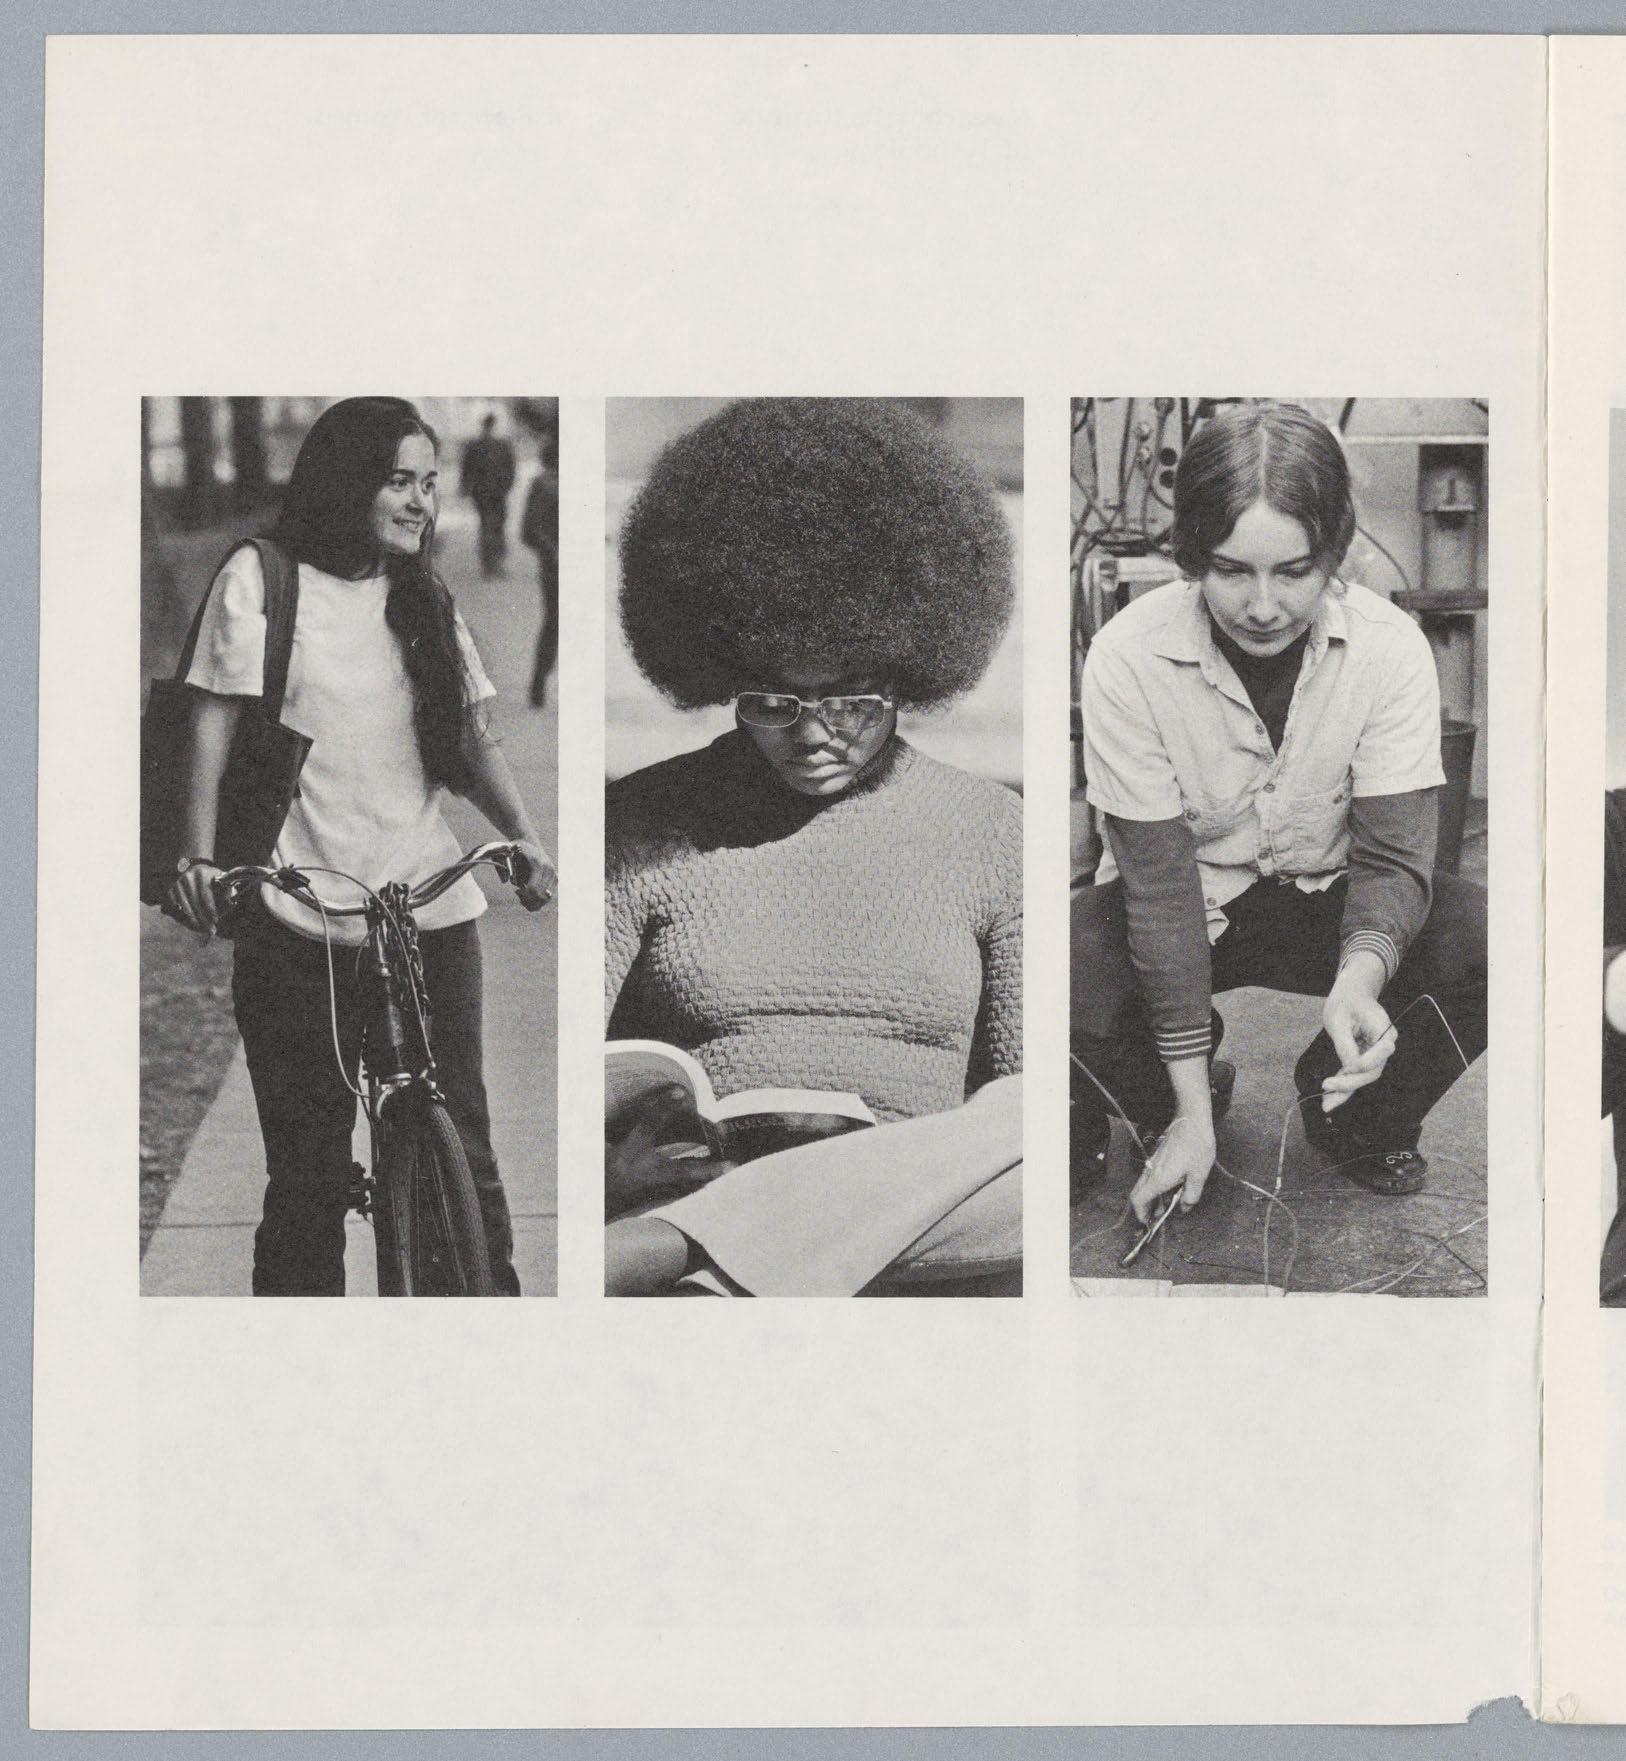 Massachusetts Institute of Technology: A Place for Women, p. 2, 1973